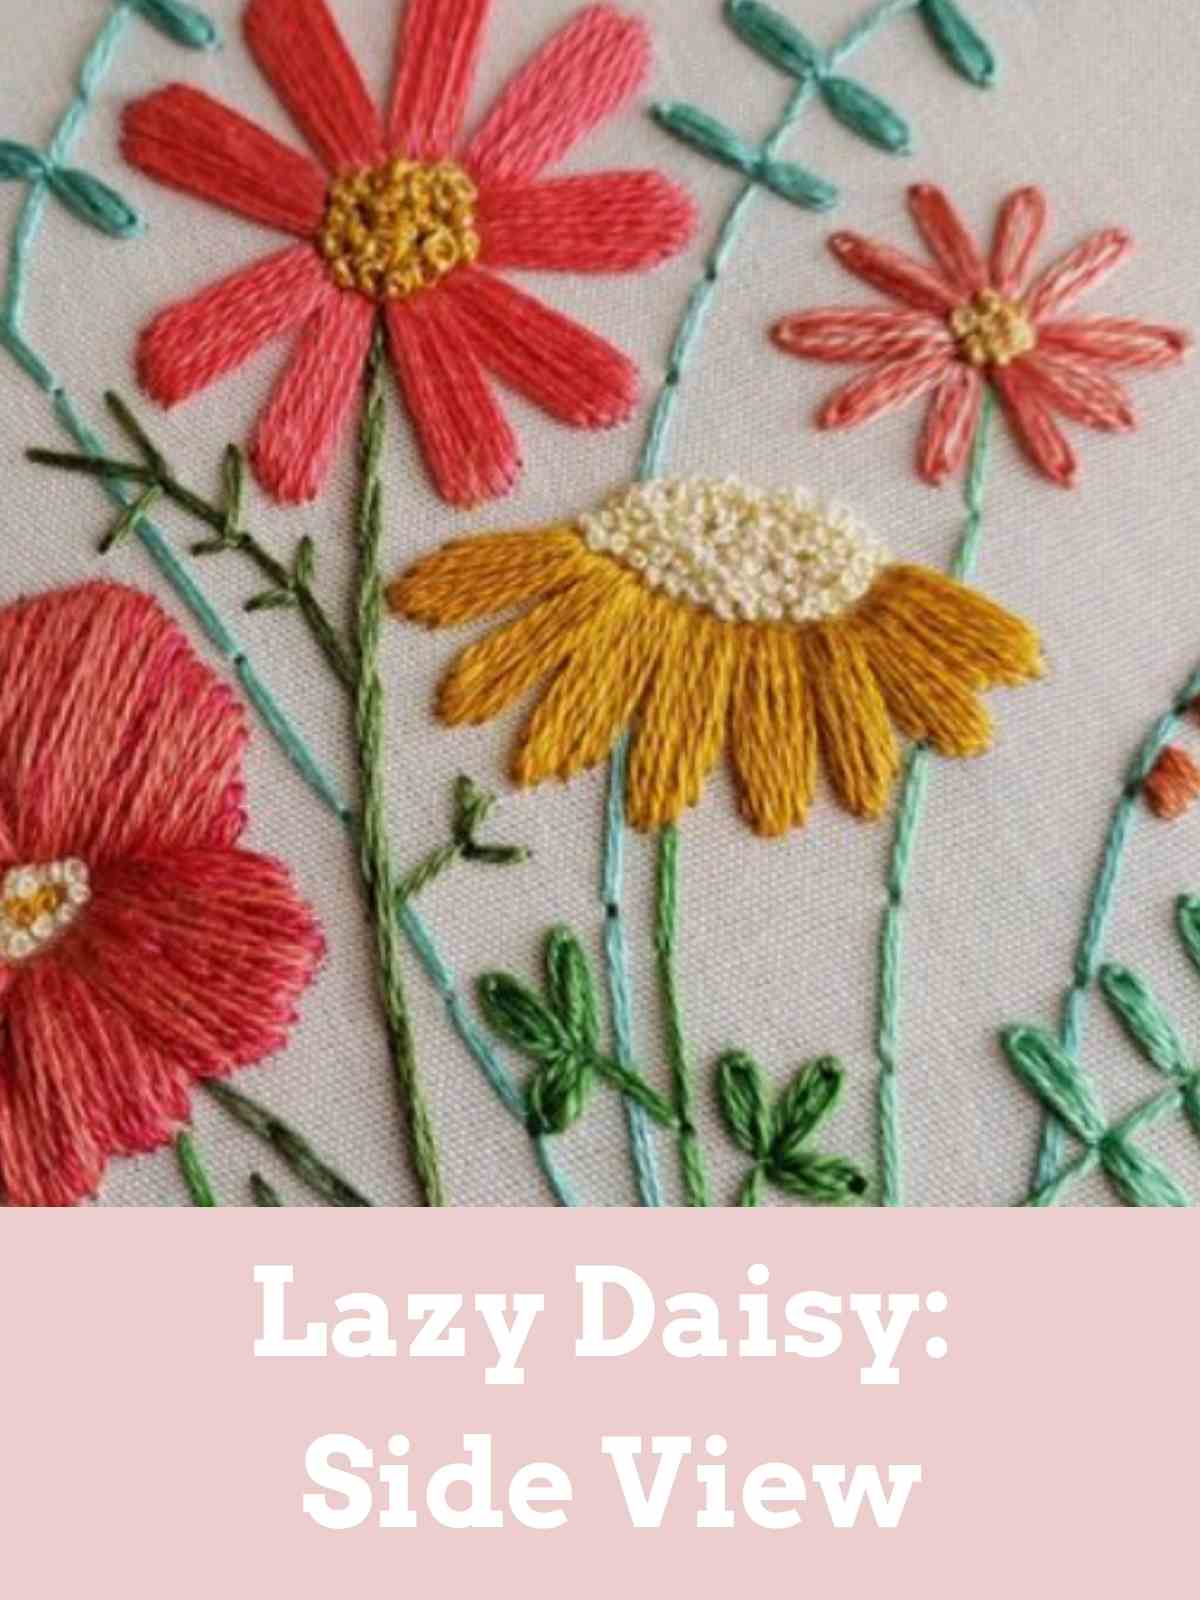 Side View of how to create a Lazy Daisy